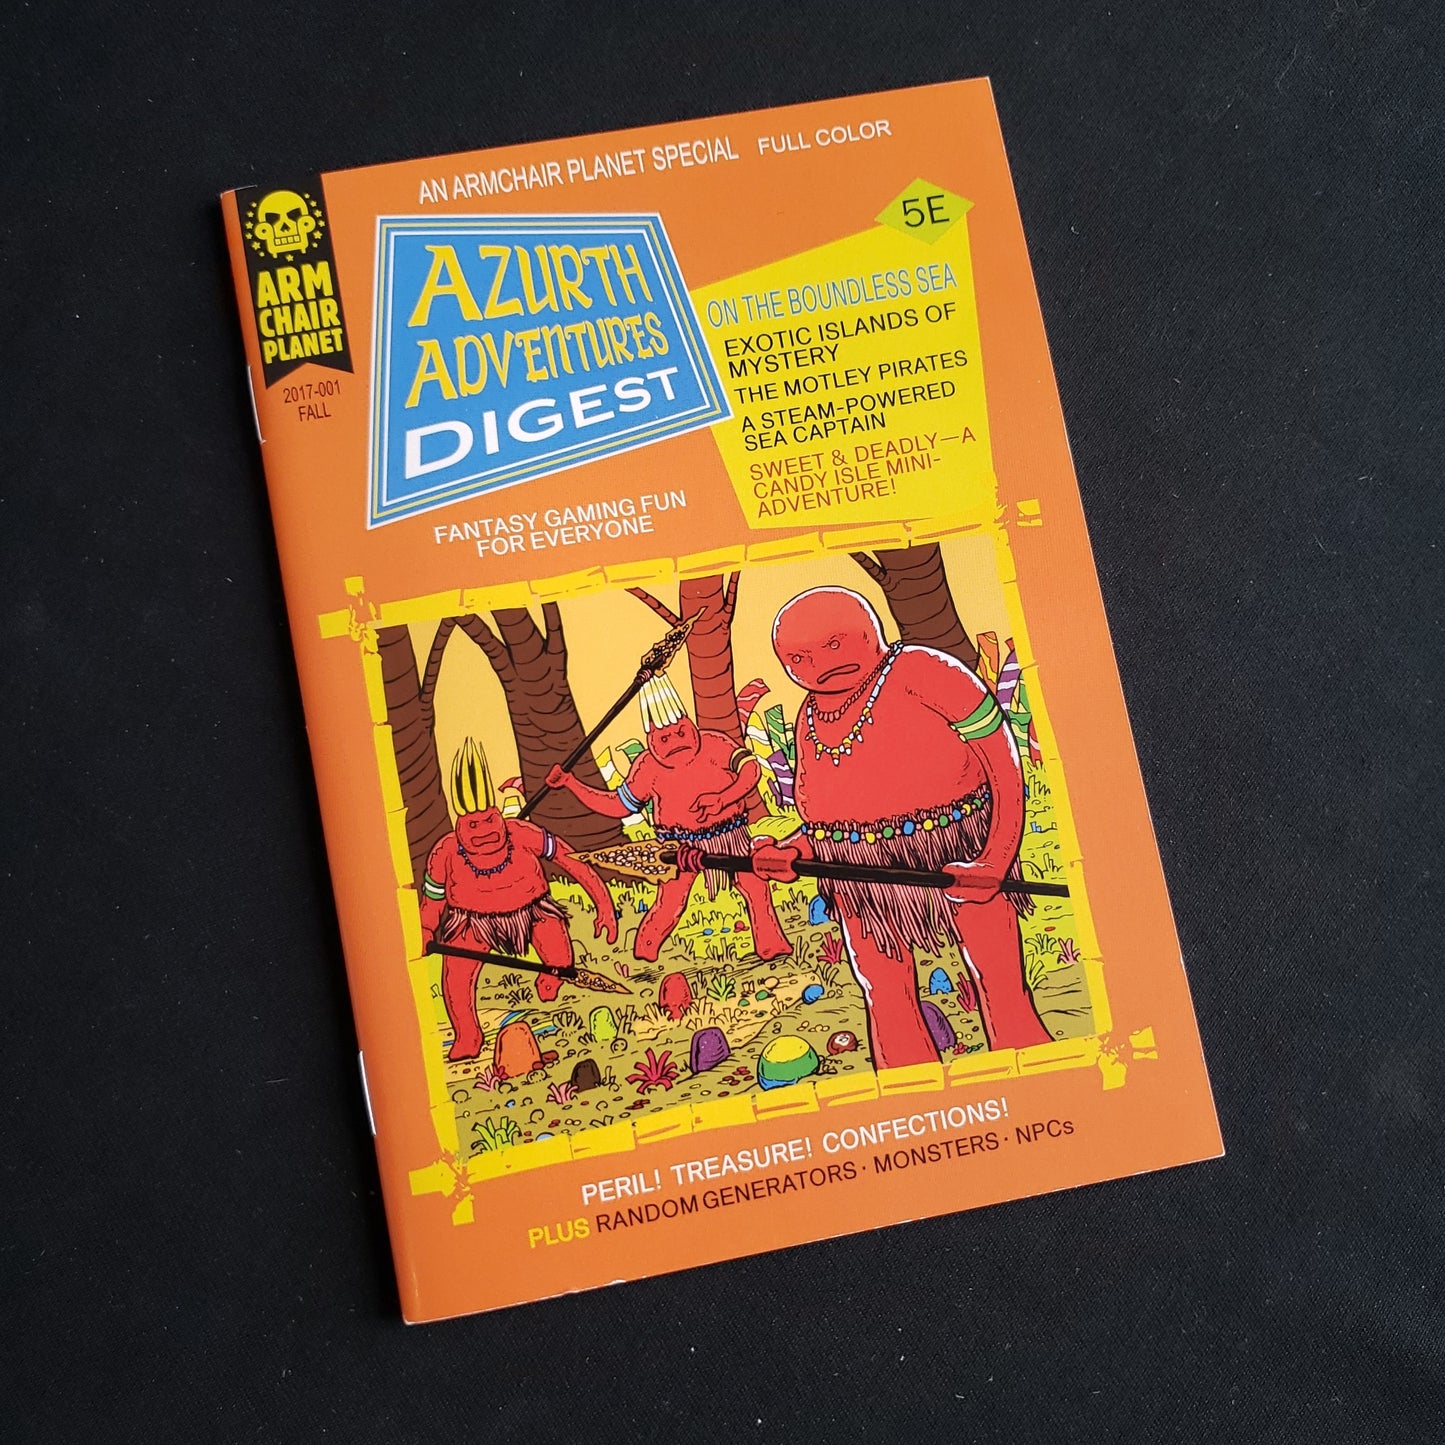 Image shows the front cover of the Azurth Adventures Digest: No. 1 roleplaying game zine